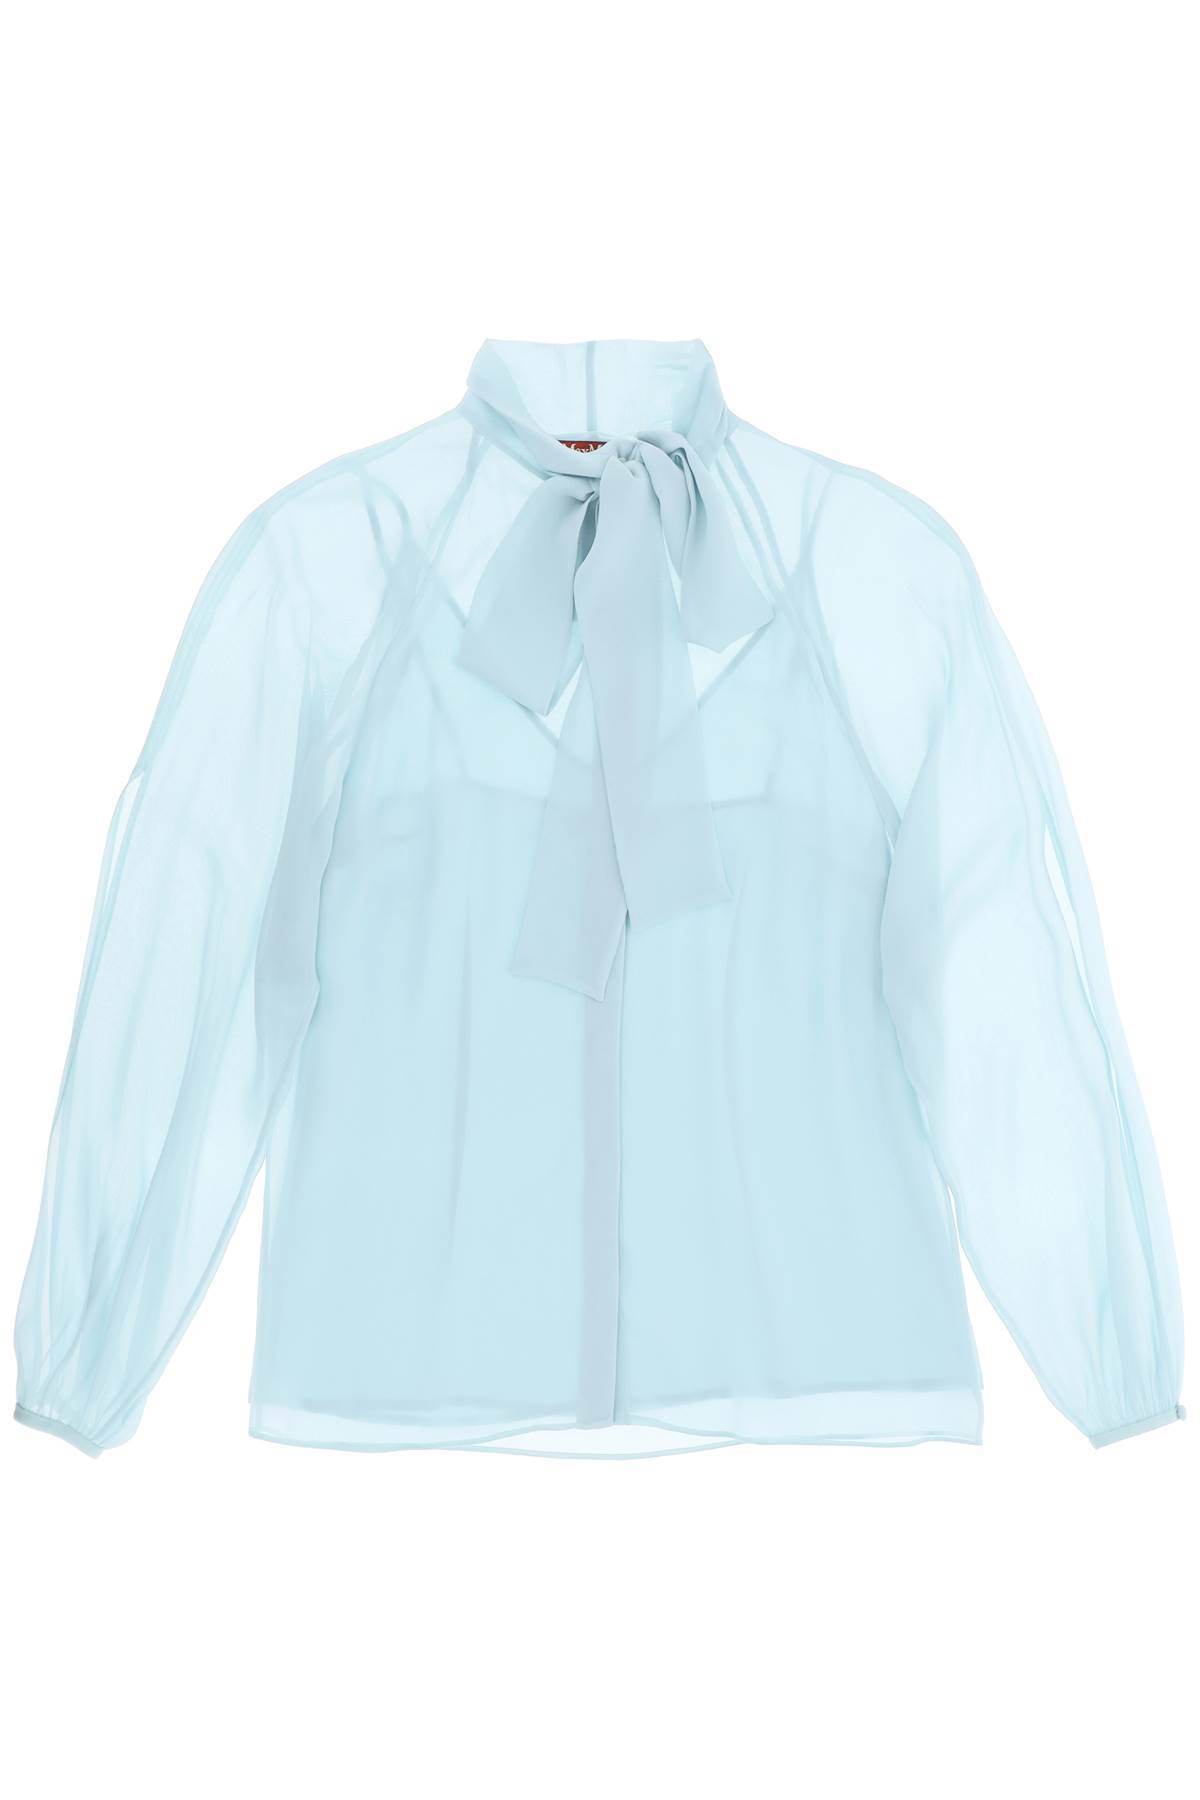 Max Mara Fascino Silk Shirt With Lavalliere Tie In Light Blue